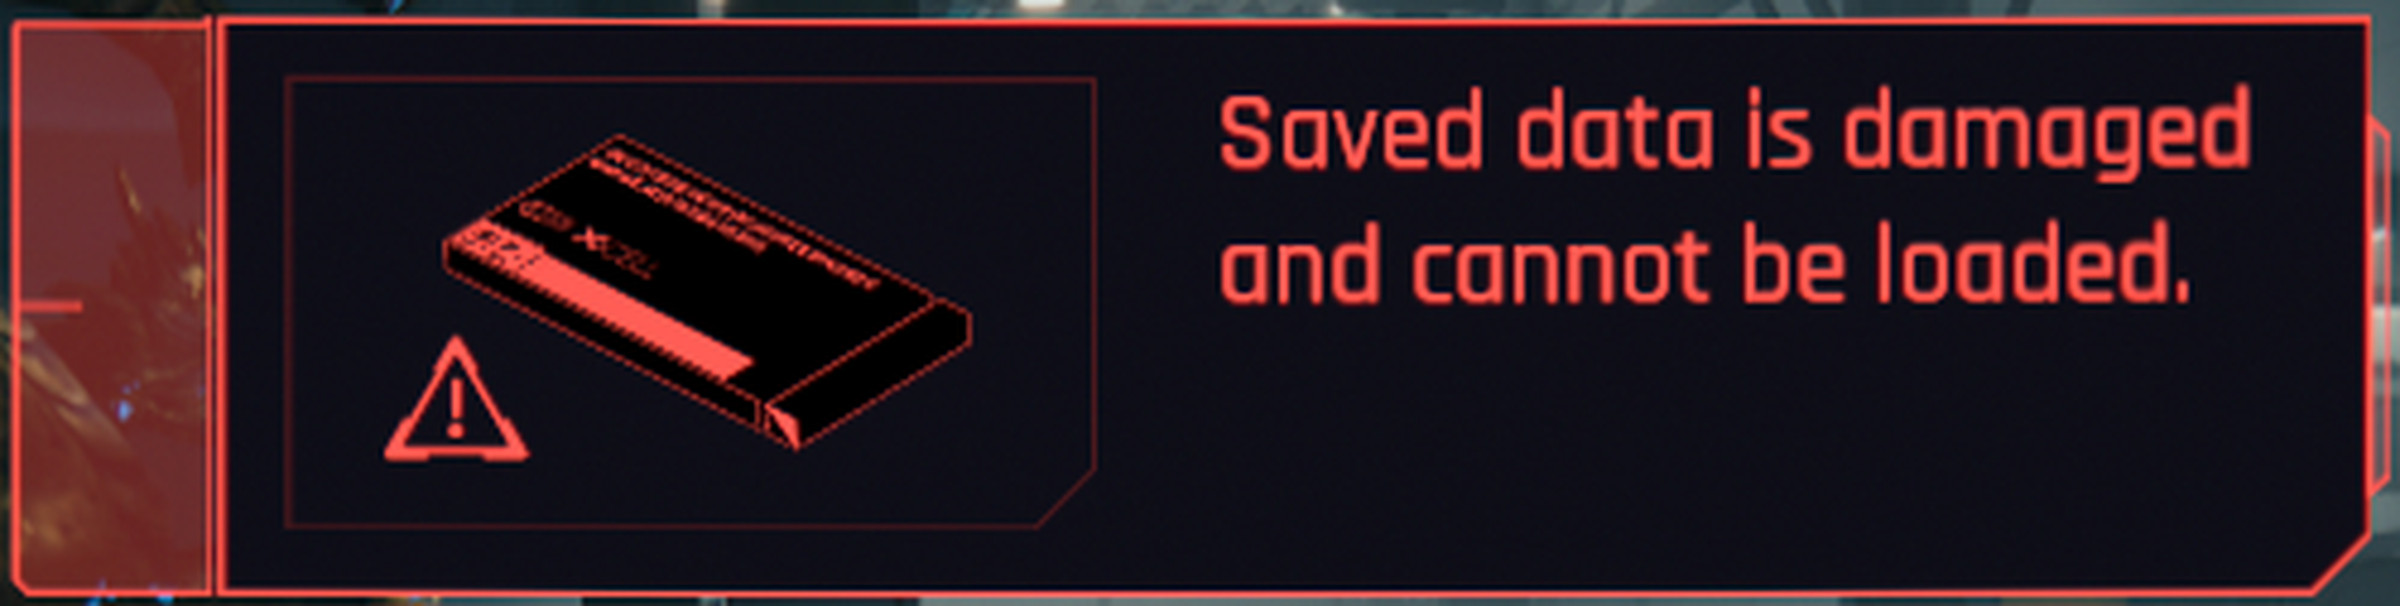 The prompt shown for corrupted saves in Cyberpunk 2077.